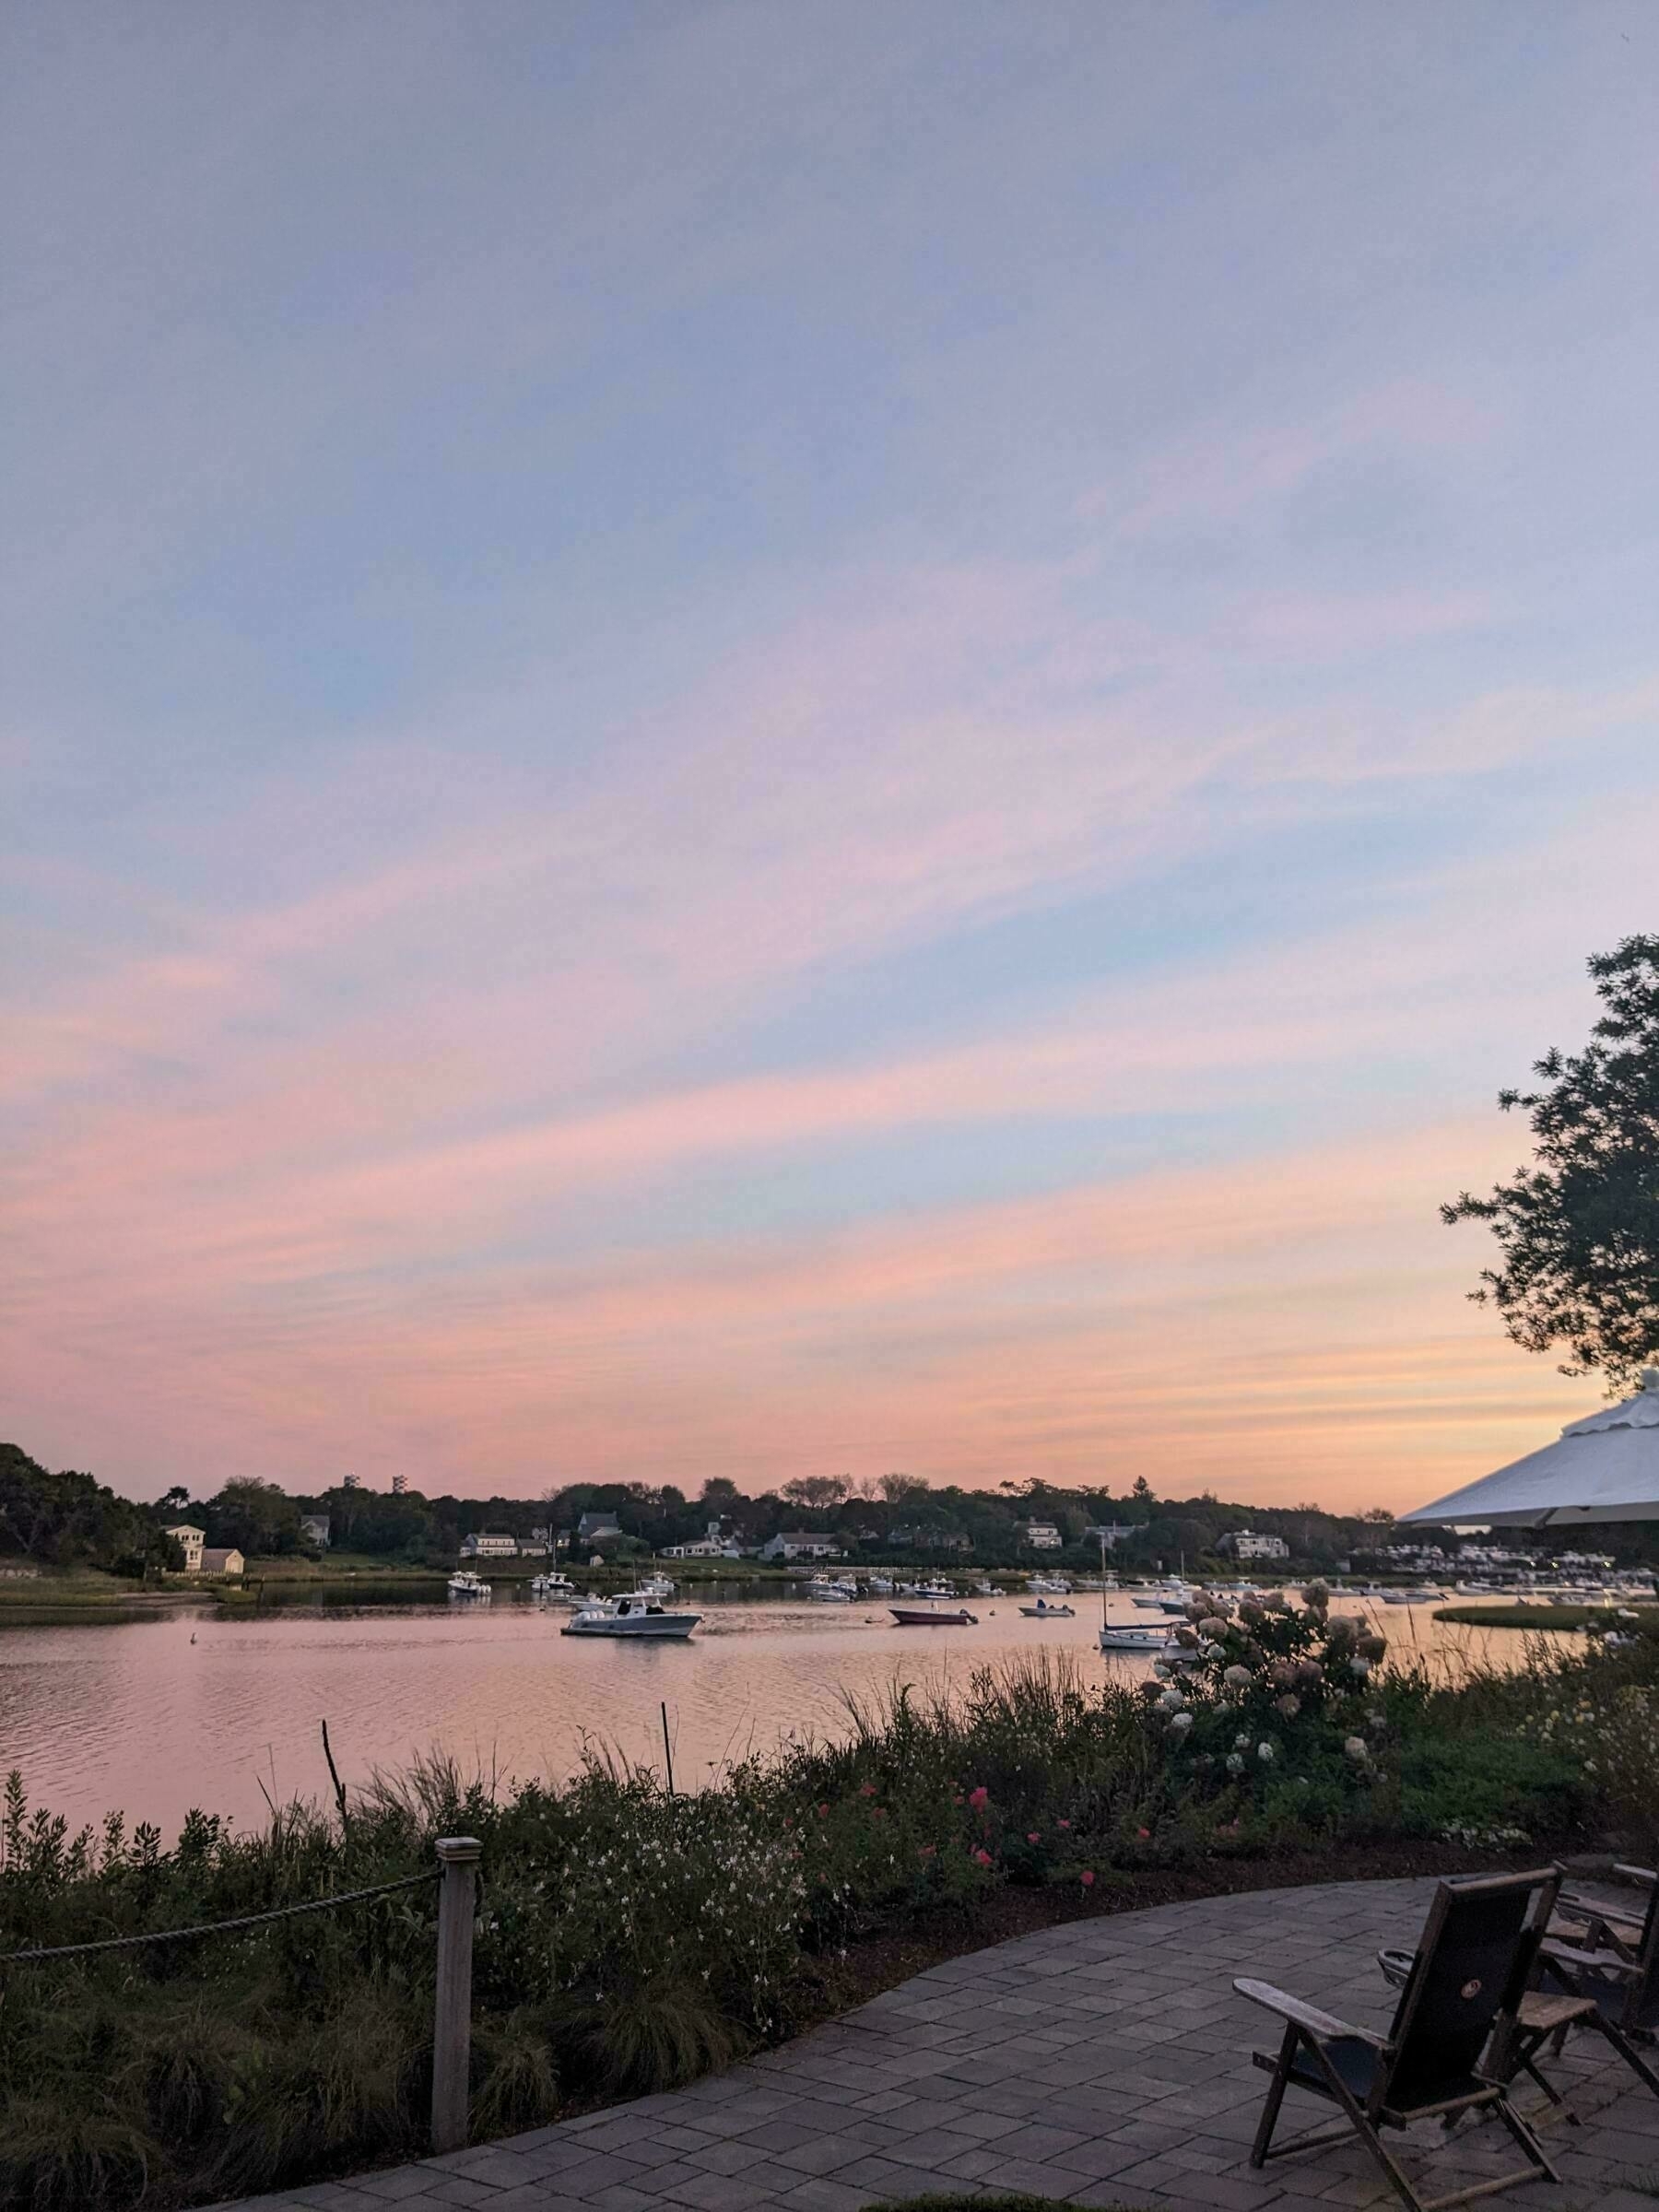 Cape Cod sunset over a cove with subtle pink and blue skies.